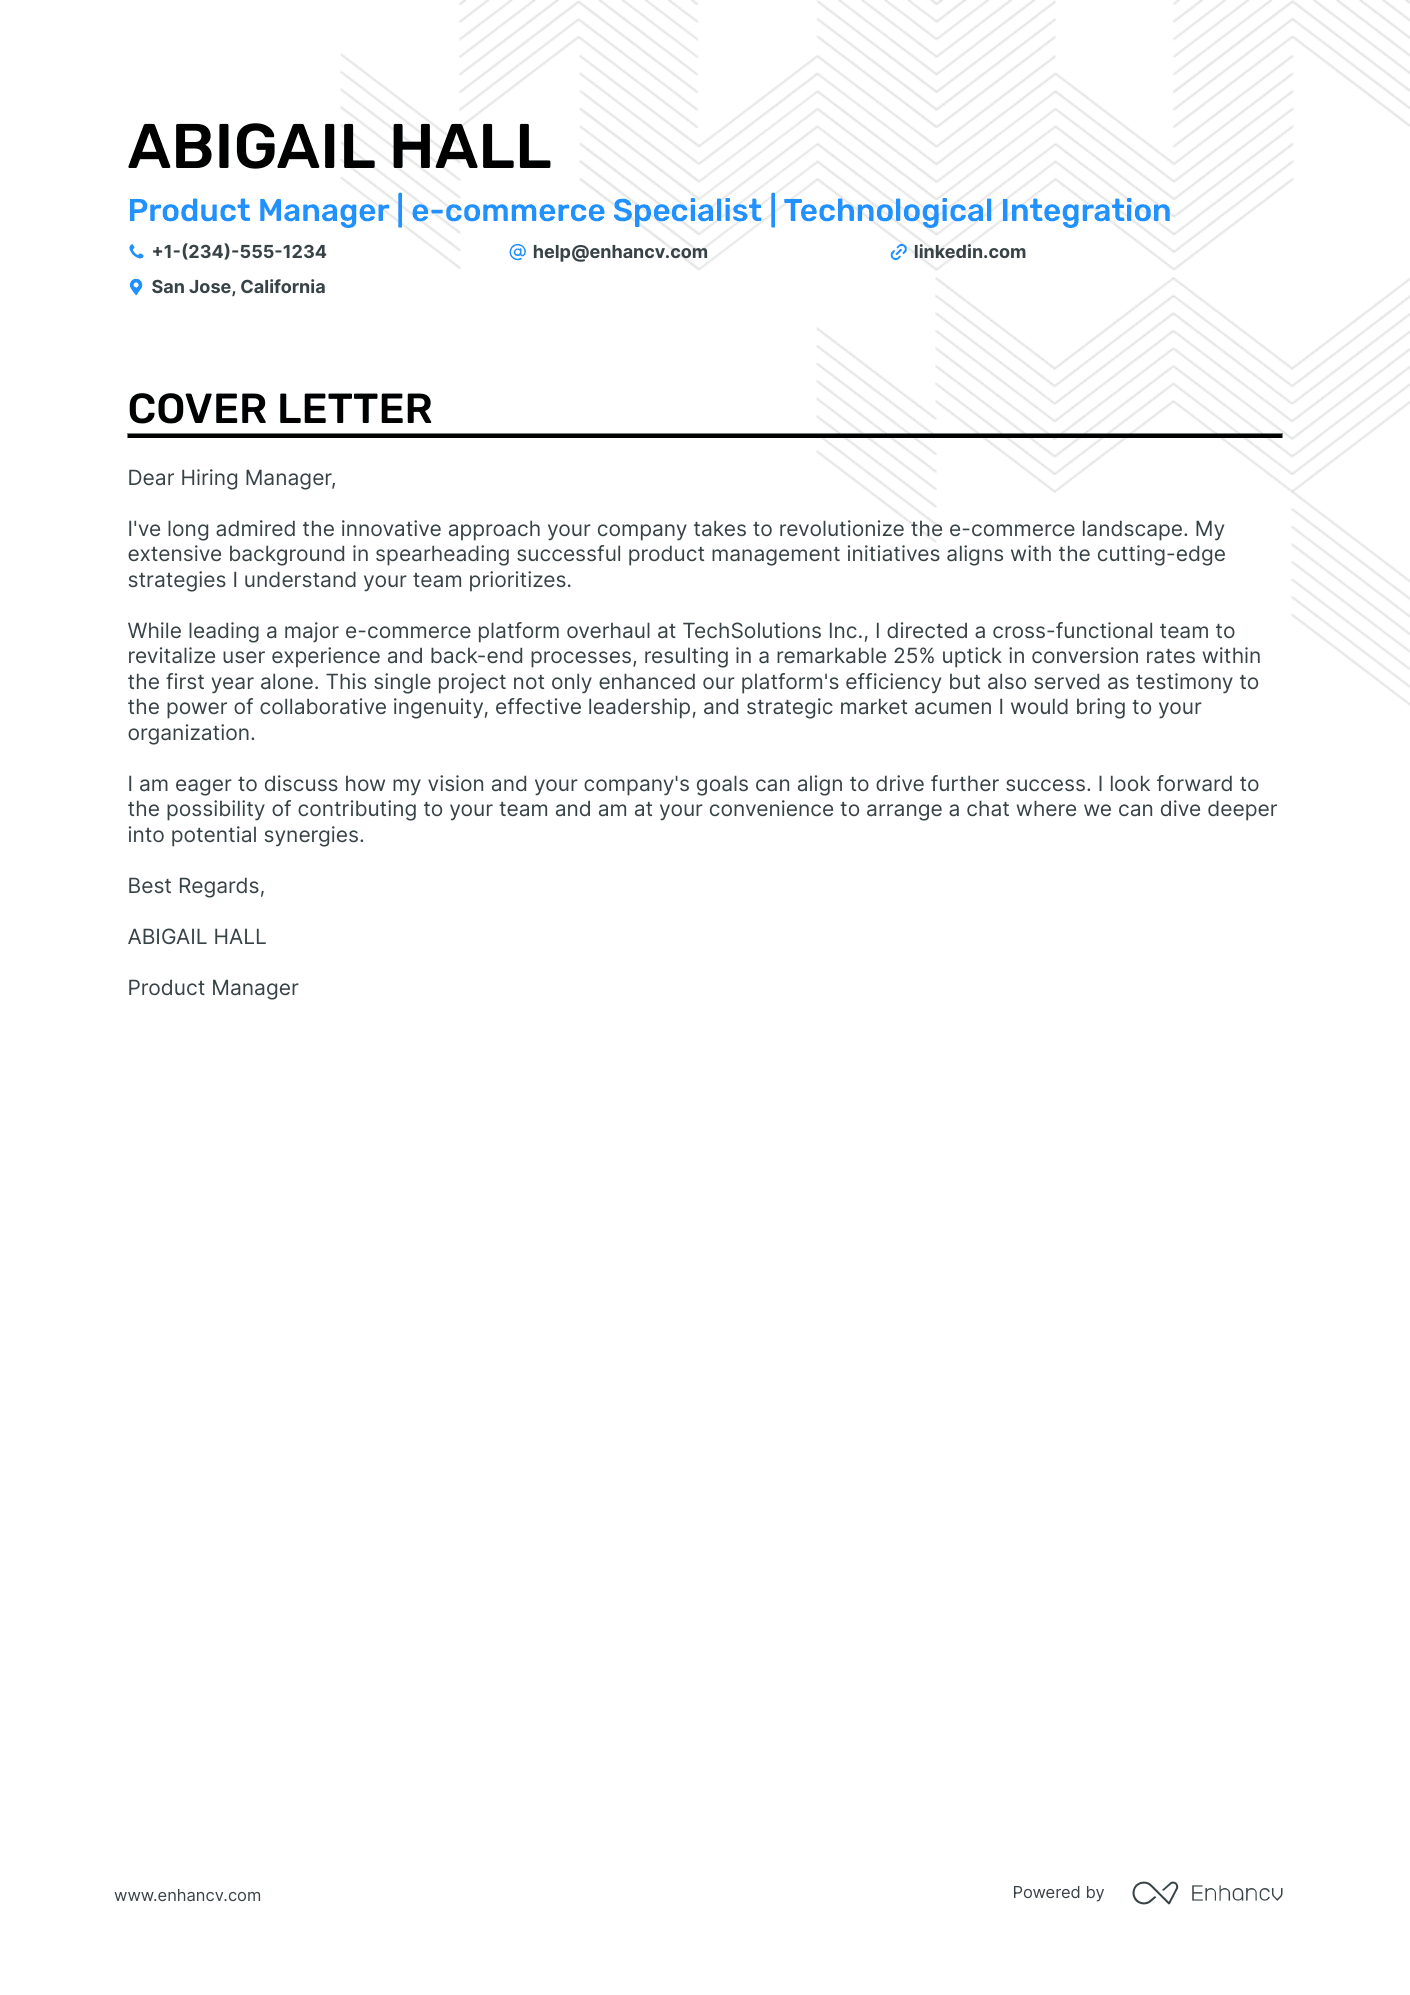 Ecommerce Product Manager cover letter